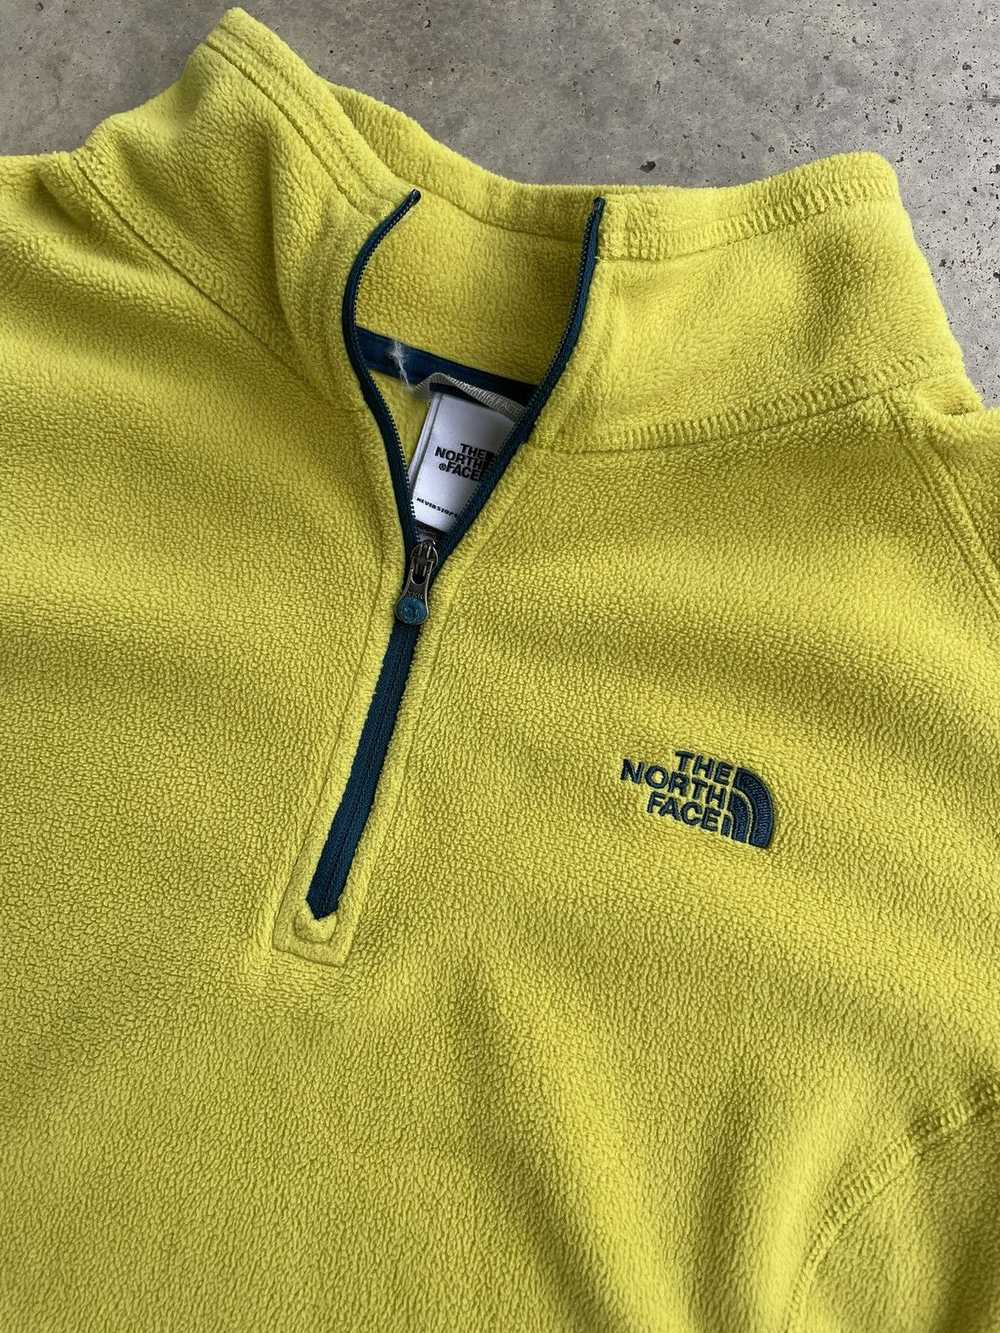 The North Face The North Face Yellow Fleece - image 2